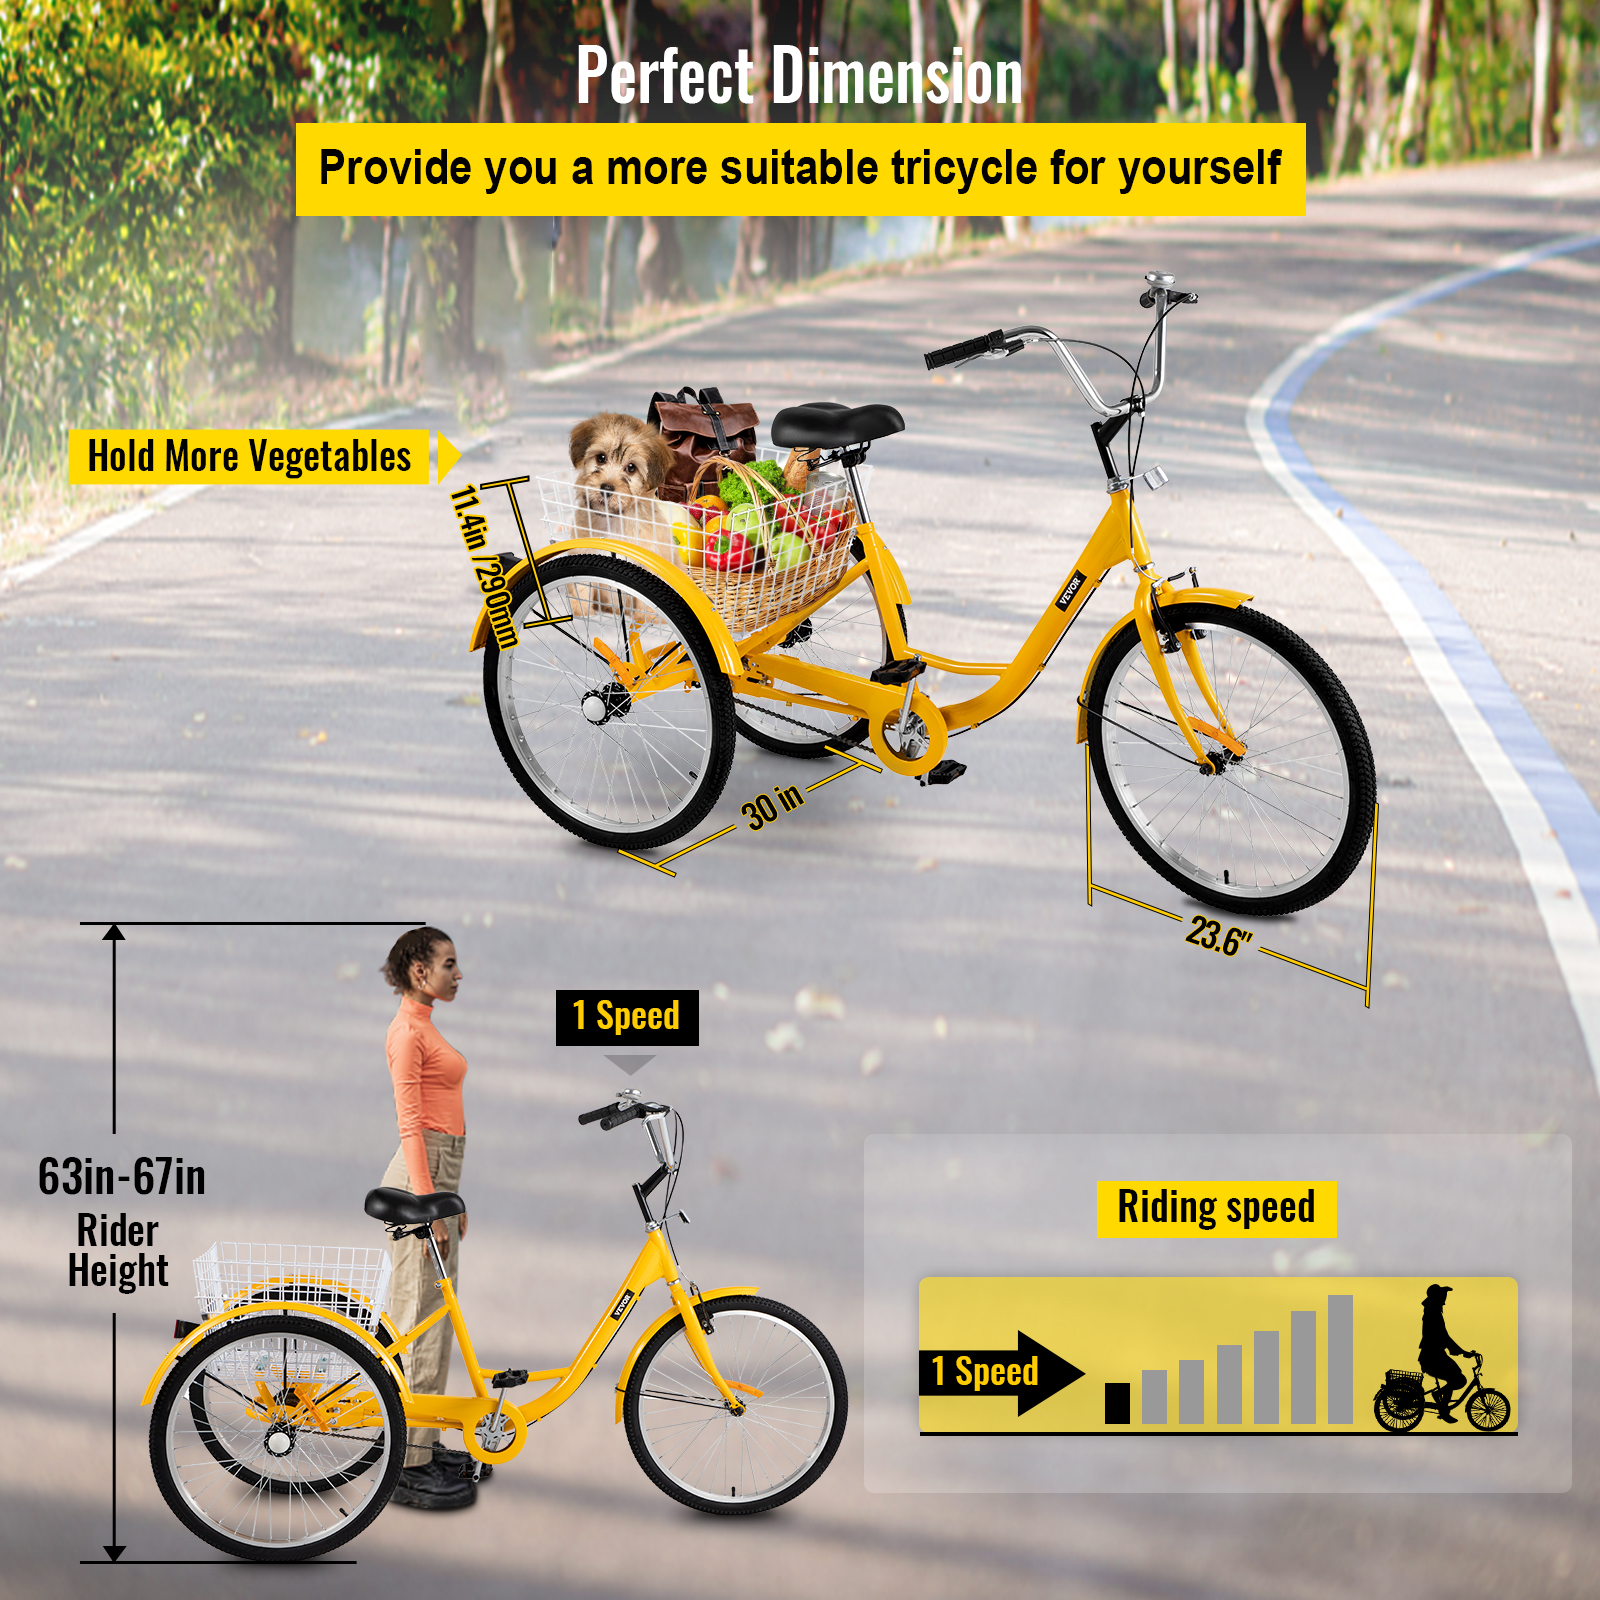 VEVOR Adult Tricycle 24 inch, 1-Speed Three Wheel Bikes , Yellow Tricycle with Bell Brake System, Bicycles with Cargo Basket for Shopping - image 3 of 9